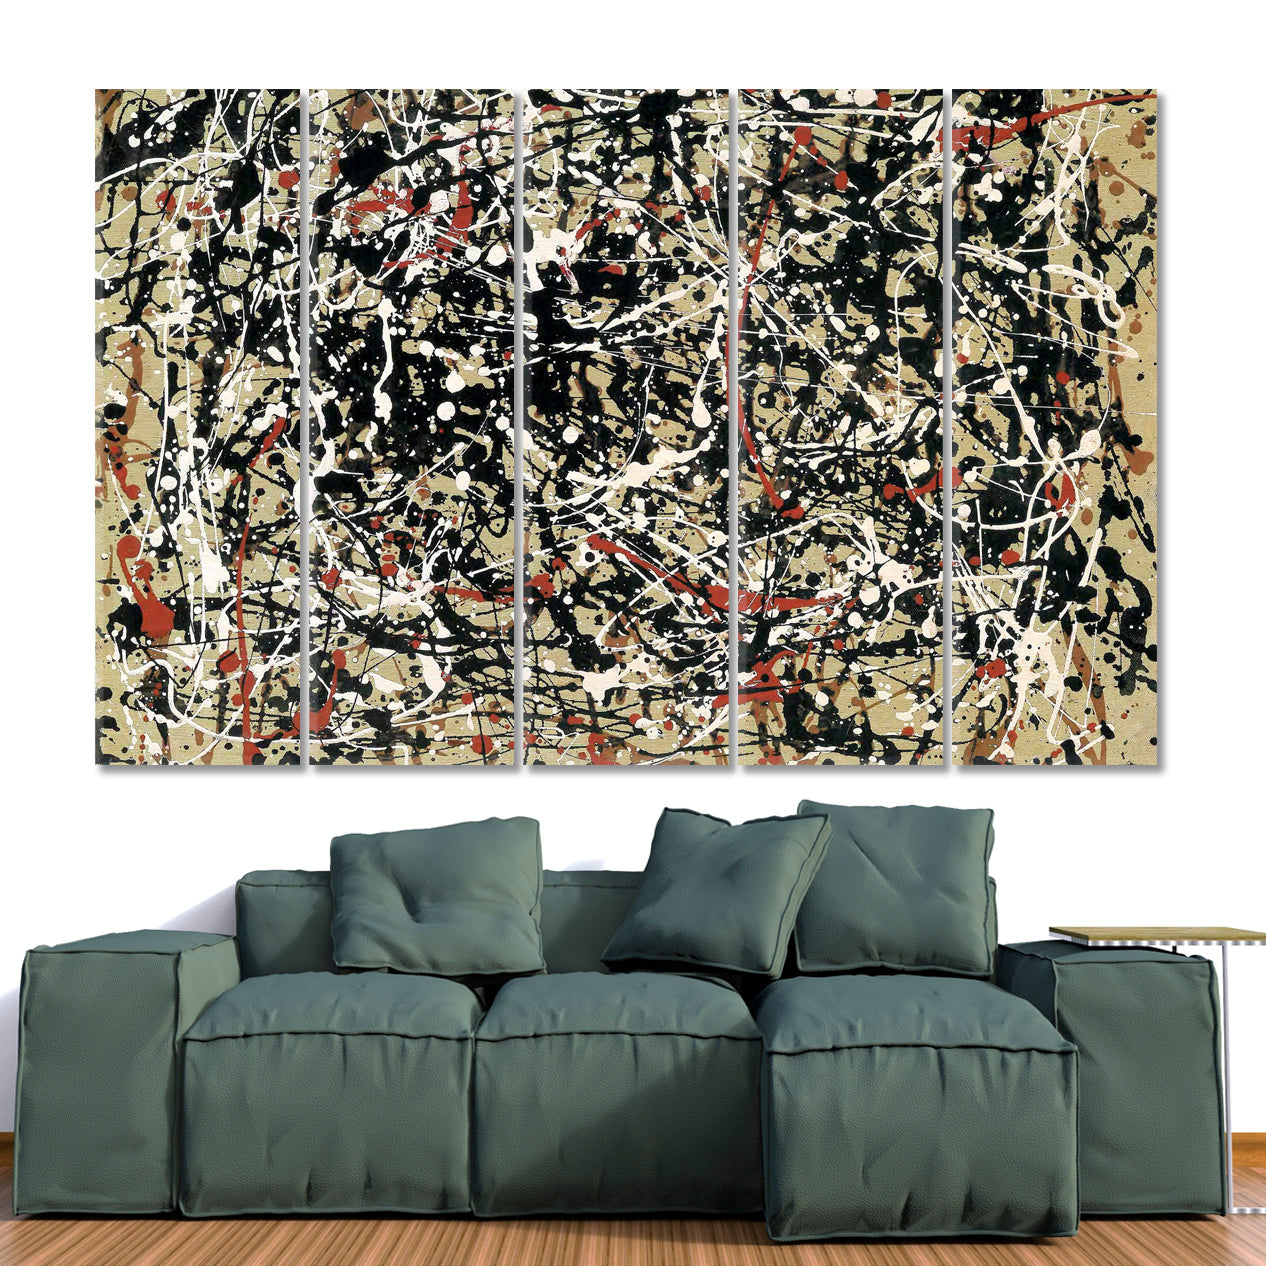 COLORFUL CENTERPIECES Jackson Pollock Style Drip Painting Abstract Art Print Artesty 5 panels 36" x 24" 